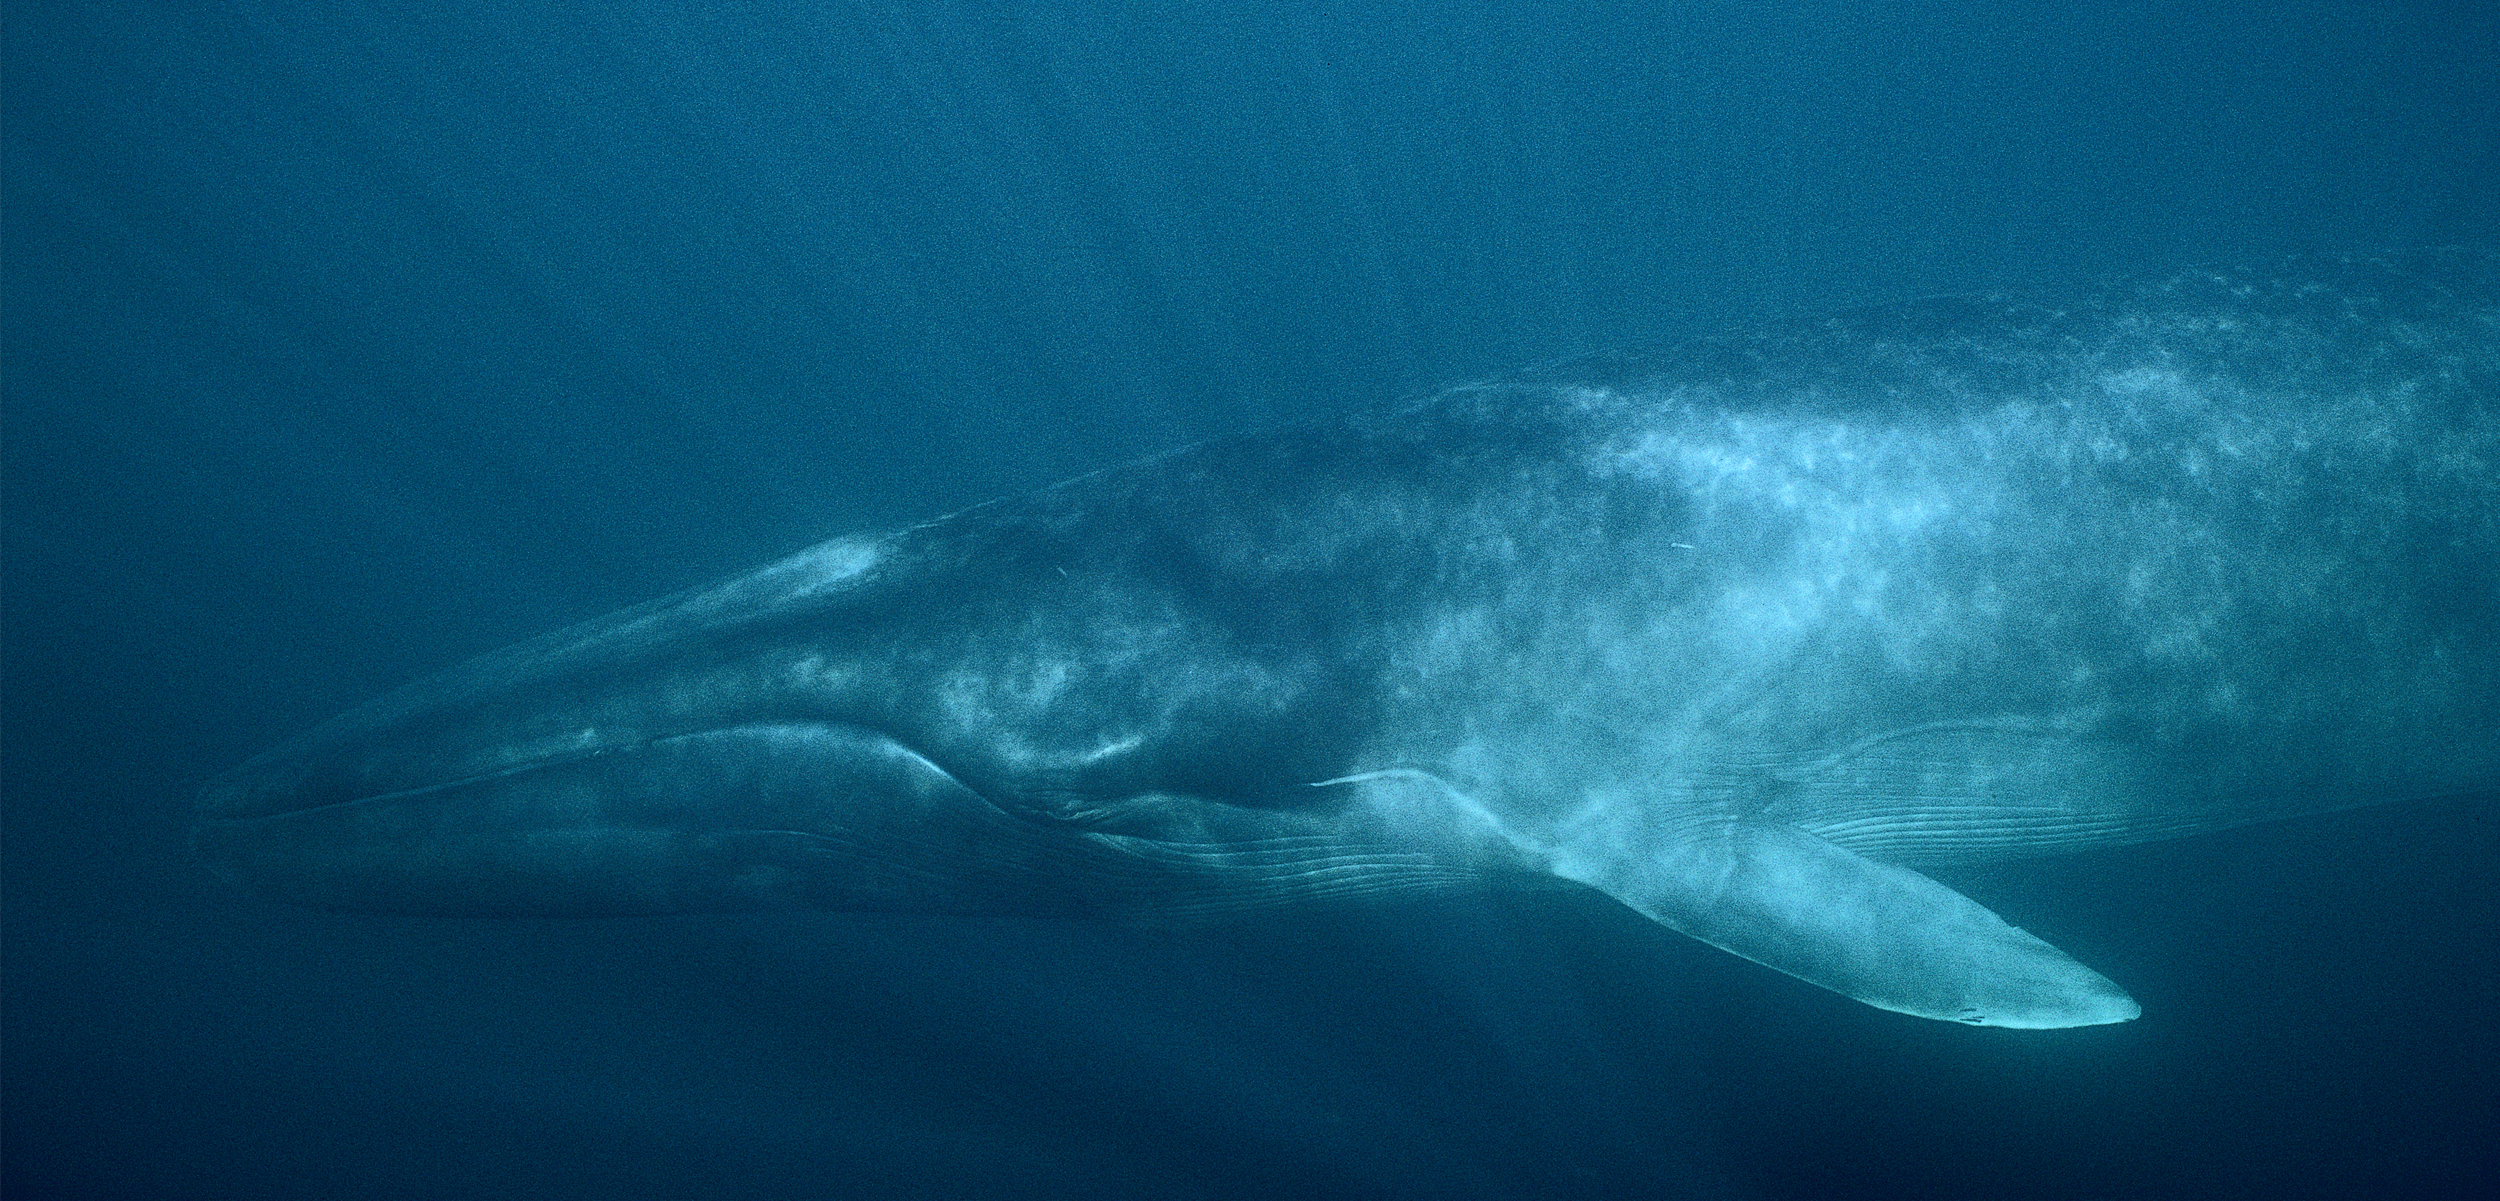 A giant fin whale against the deep blue backdrop of the sea with light illuminating down on it